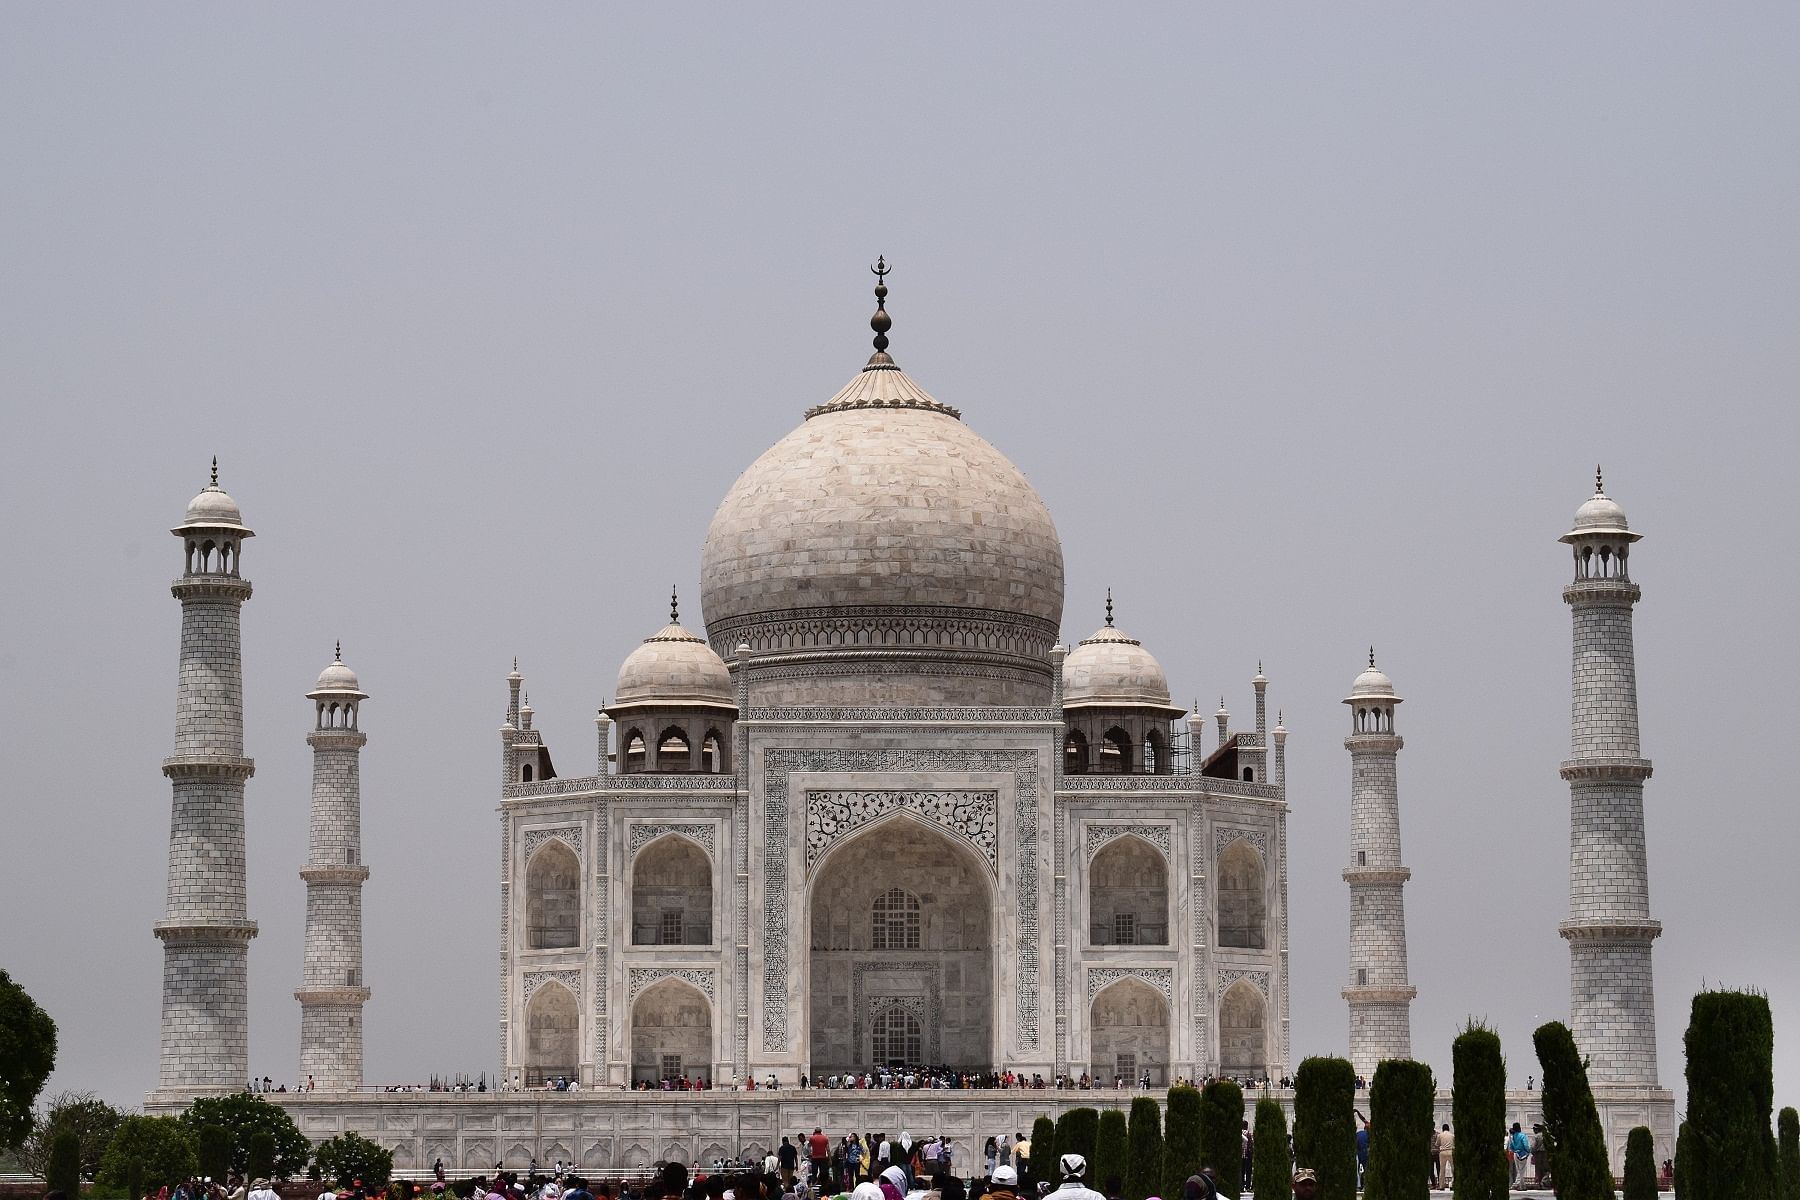 The Taj Mahal in Agra is the first Indian heritage monument to have a breastfeeding room.